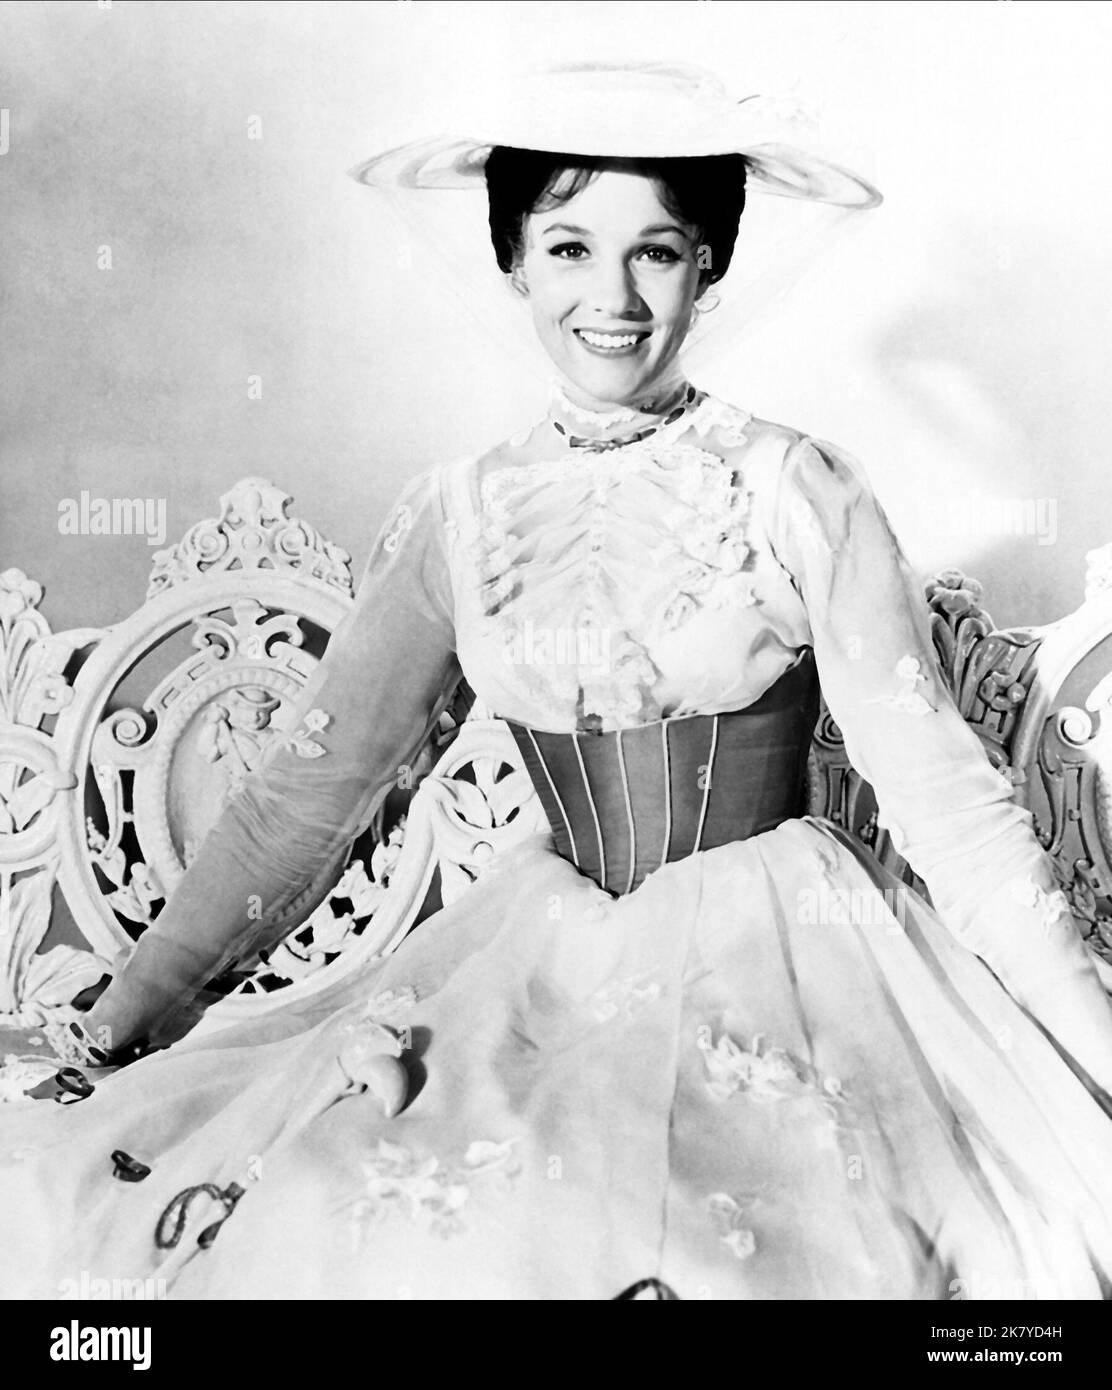 Mary poppins Black and White Stock Photos & Images - Alamy